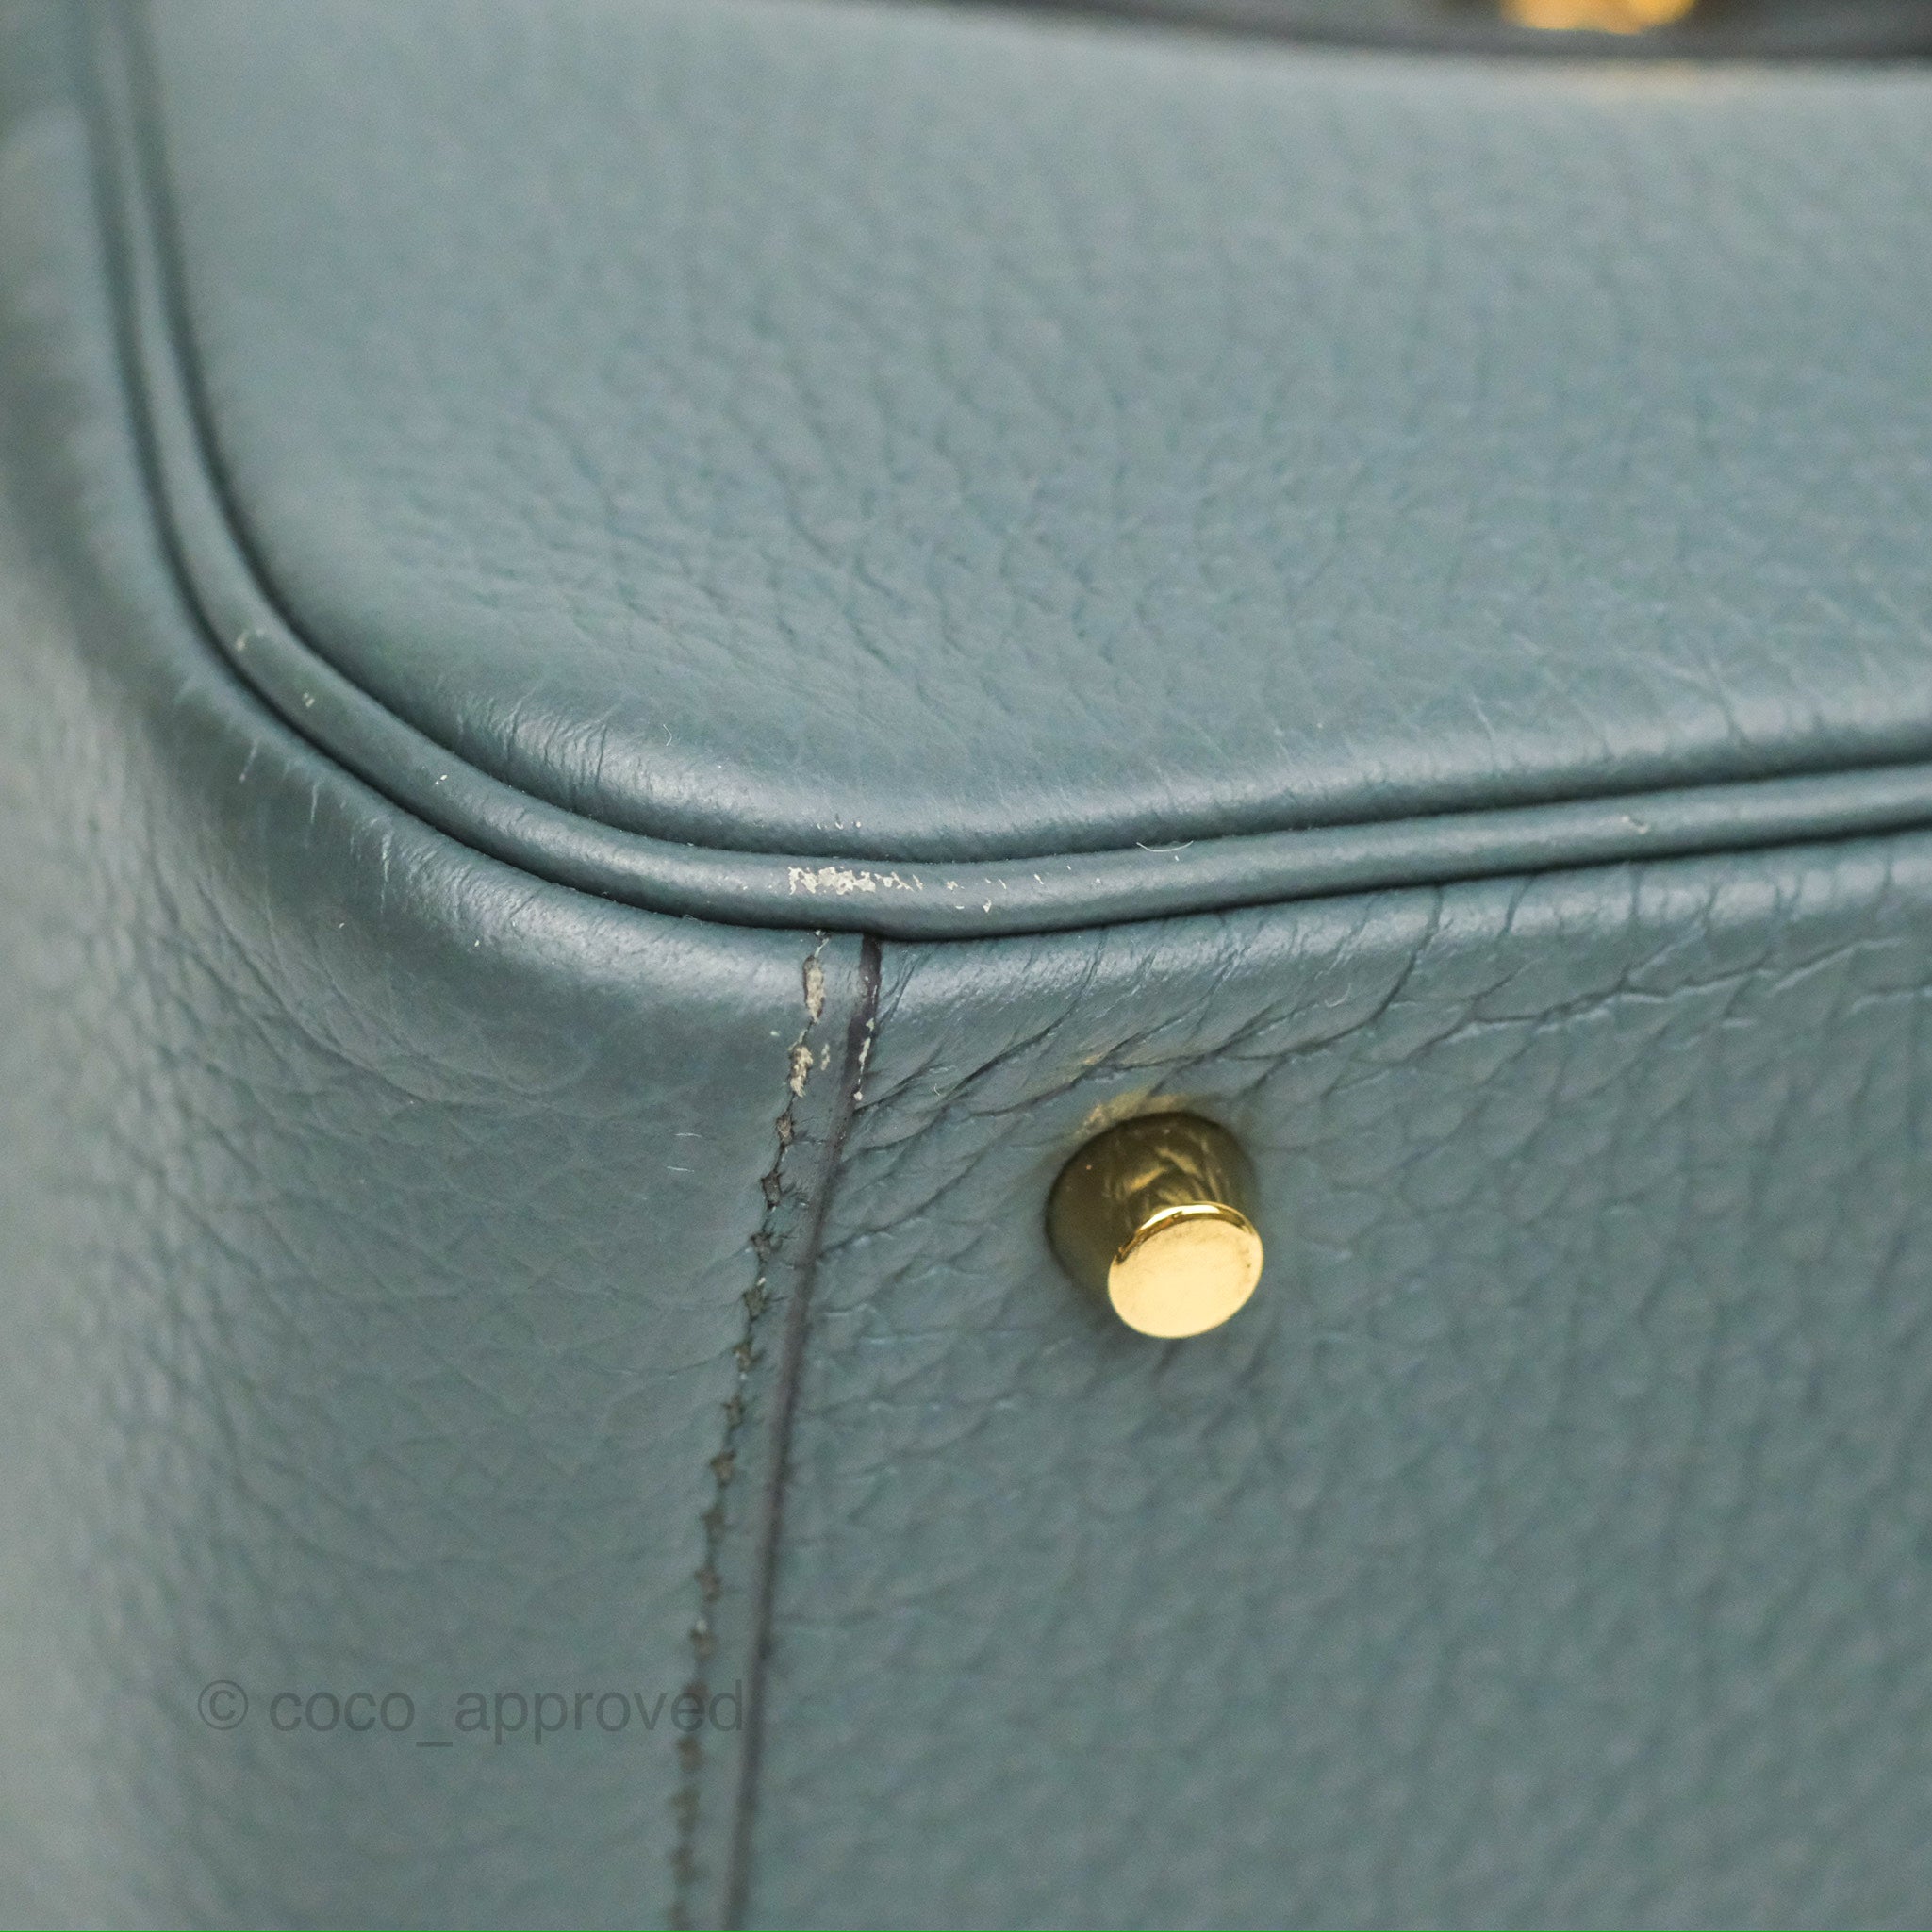 HERMÈS, DEEP BLUE MINI LINDY OF CLEMENCE LEATHER WITH GOLD HARDWARE, Handbags & Accessories, 2020